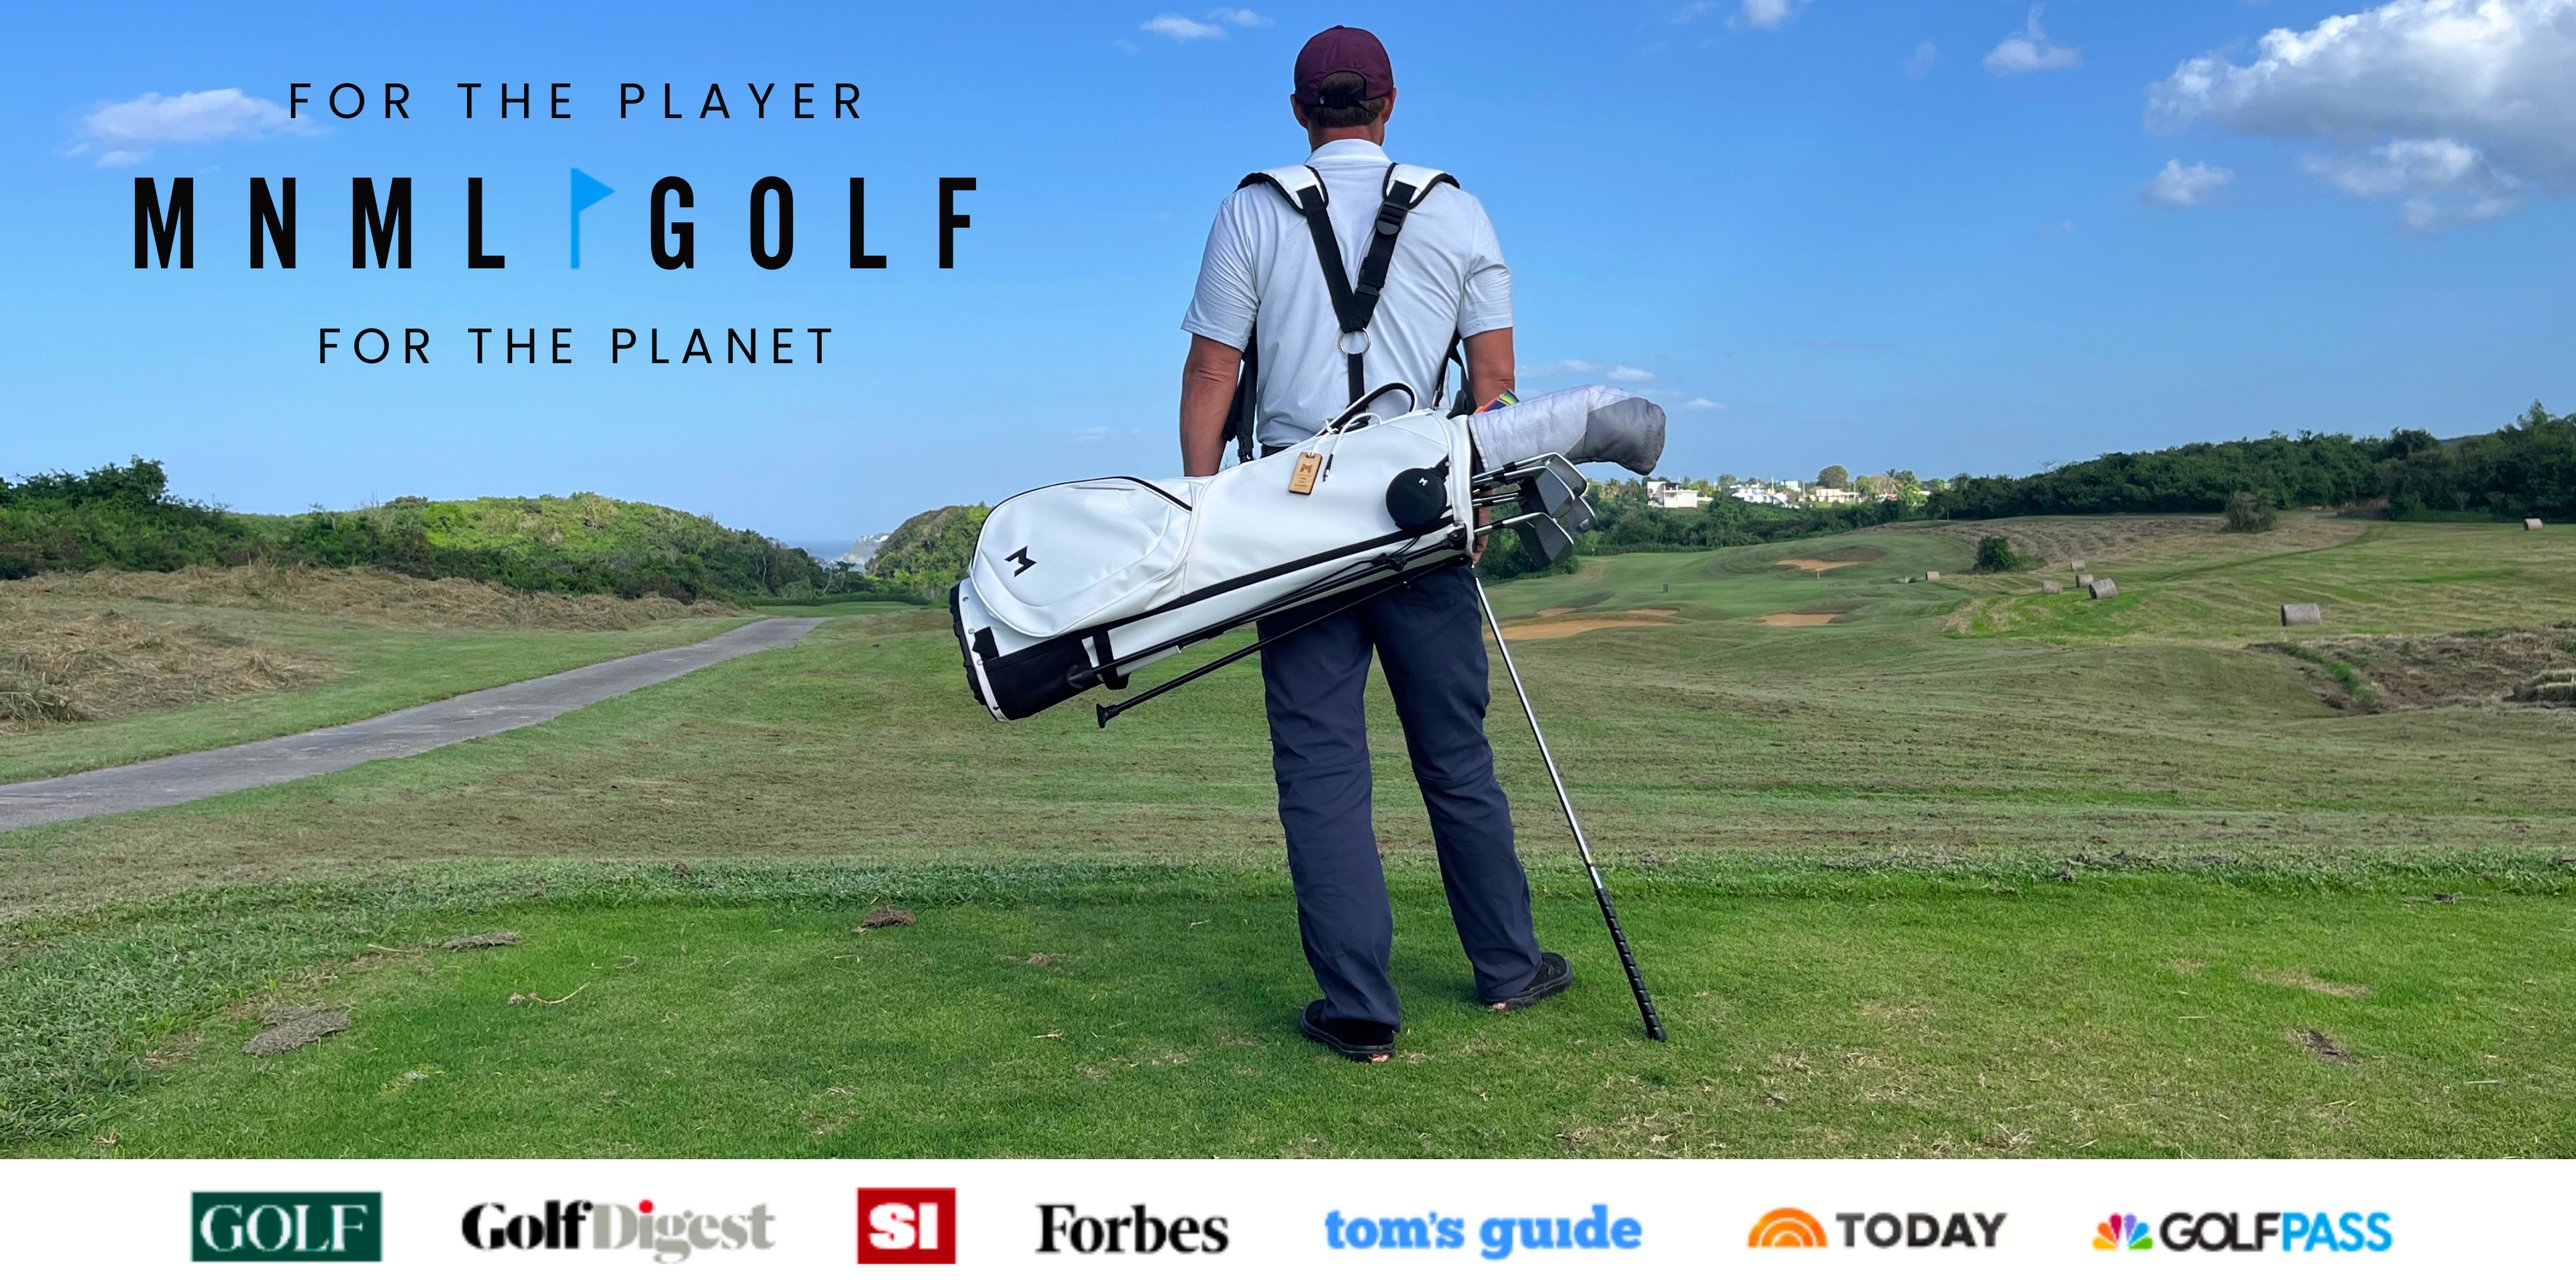 If you're looking for an eco friendly golf bag, then MNML GOLF's MR1 sustainable golf bag is a great choice for you. Available in black or white recycled material.